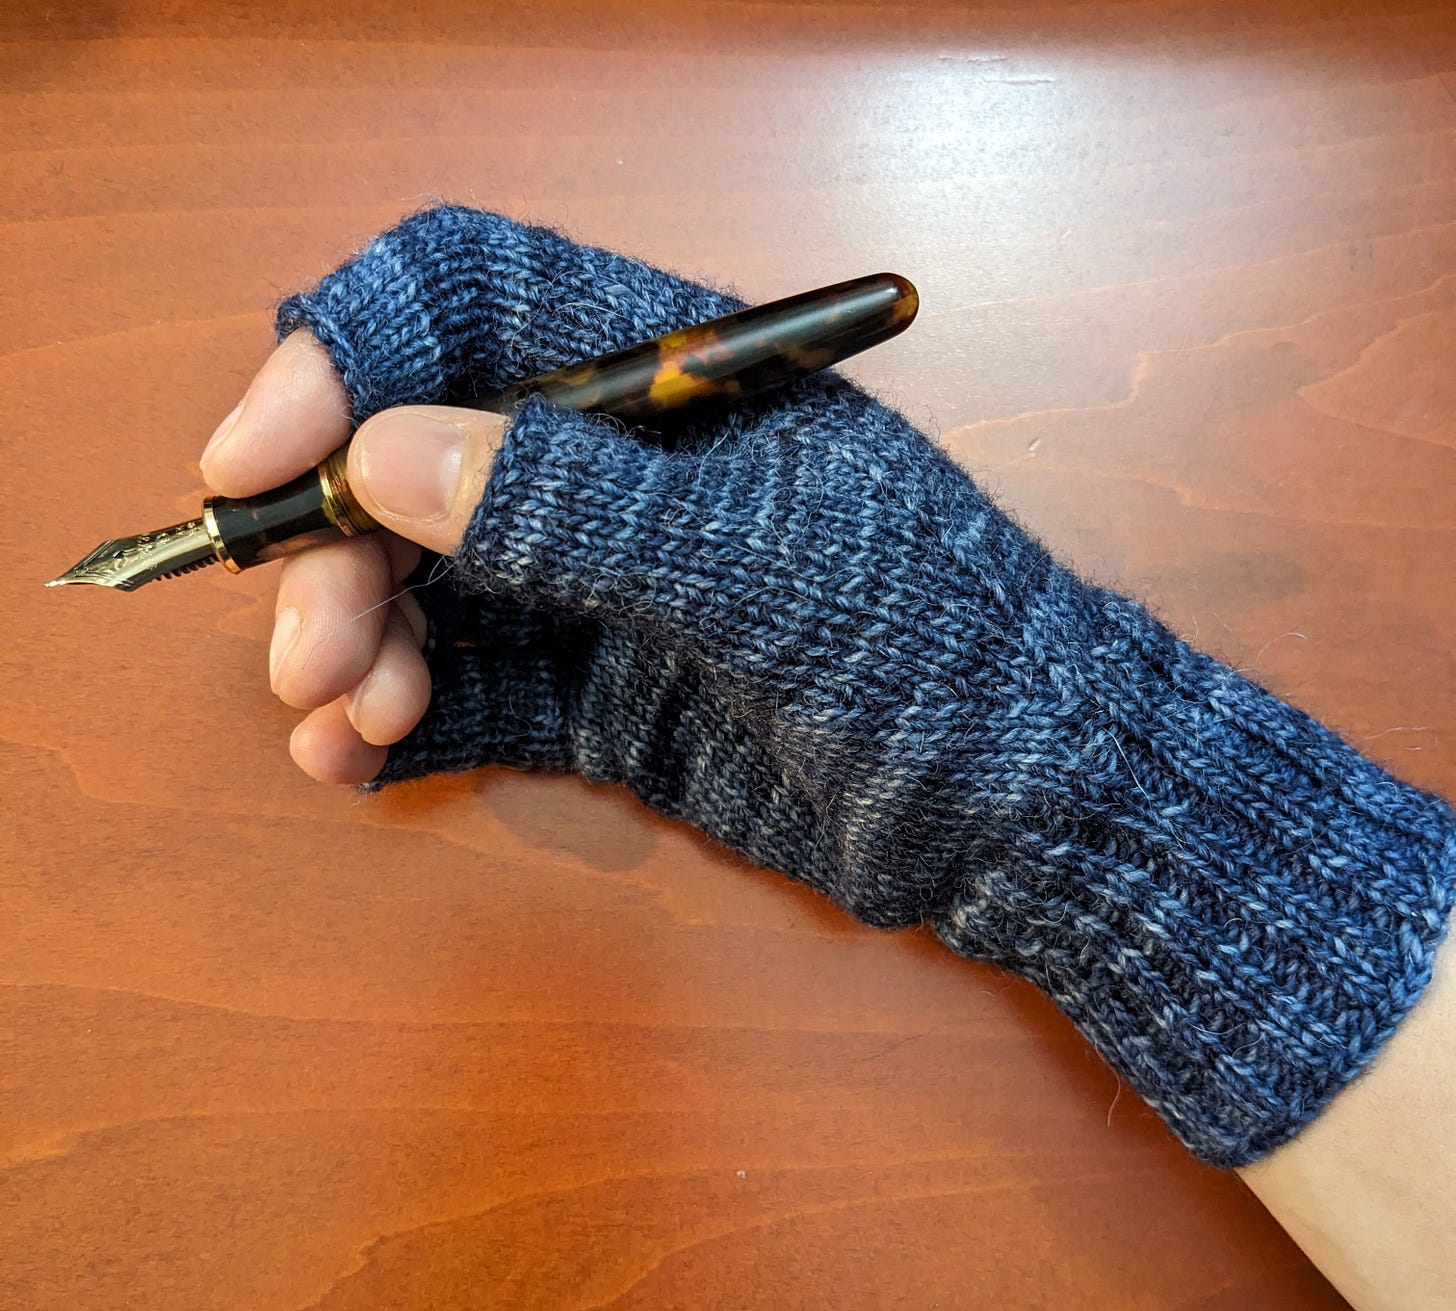 A blue hand-knit fingertip glove on a light-skinned hand holding a brown and gold fountain pen.